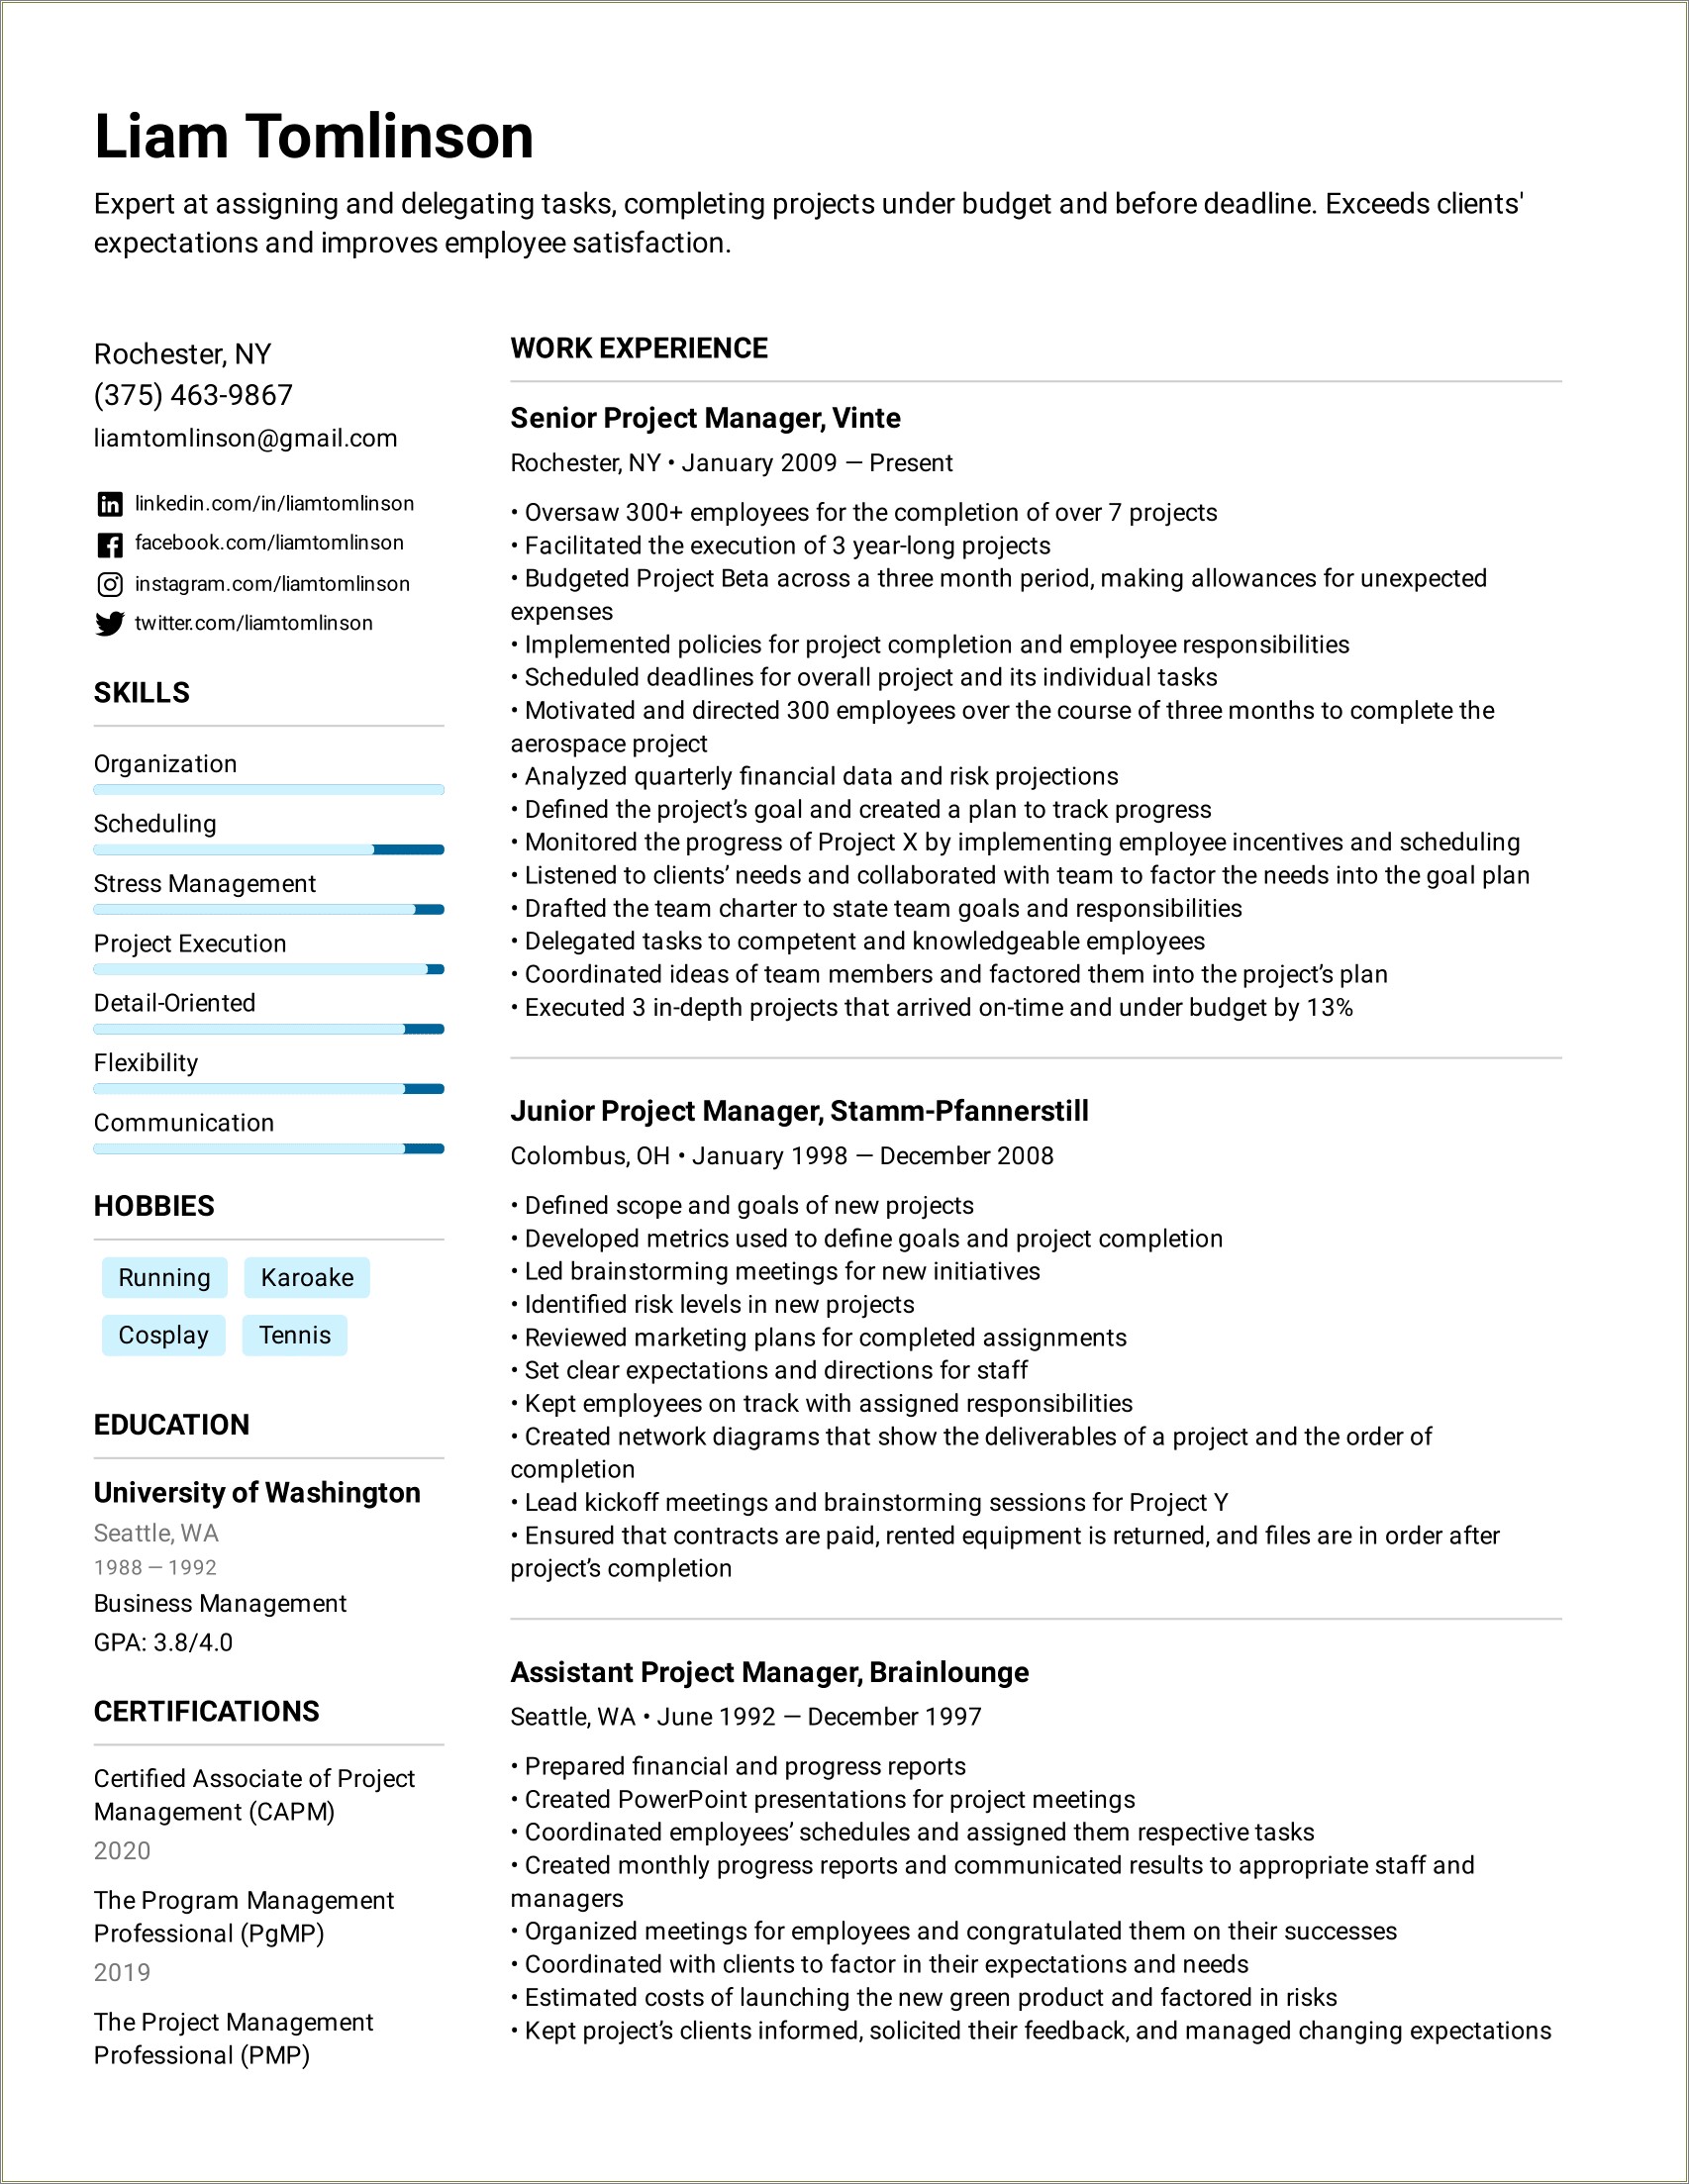 Resume Objective Examples For Executive Director